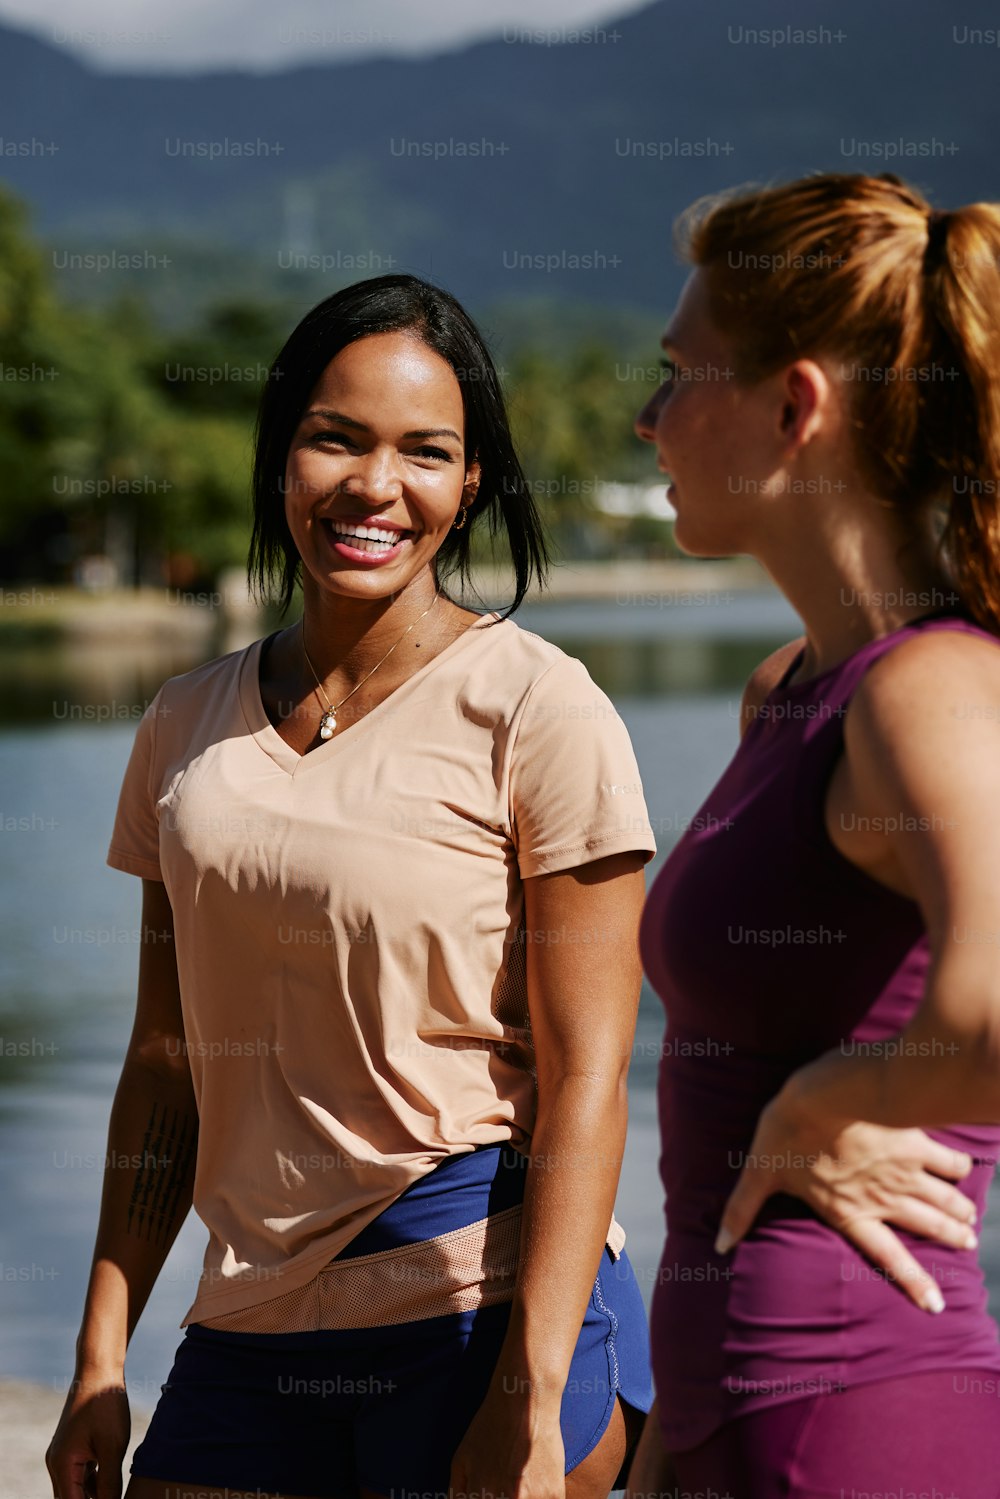 a woman standing next to another woman near a body of water